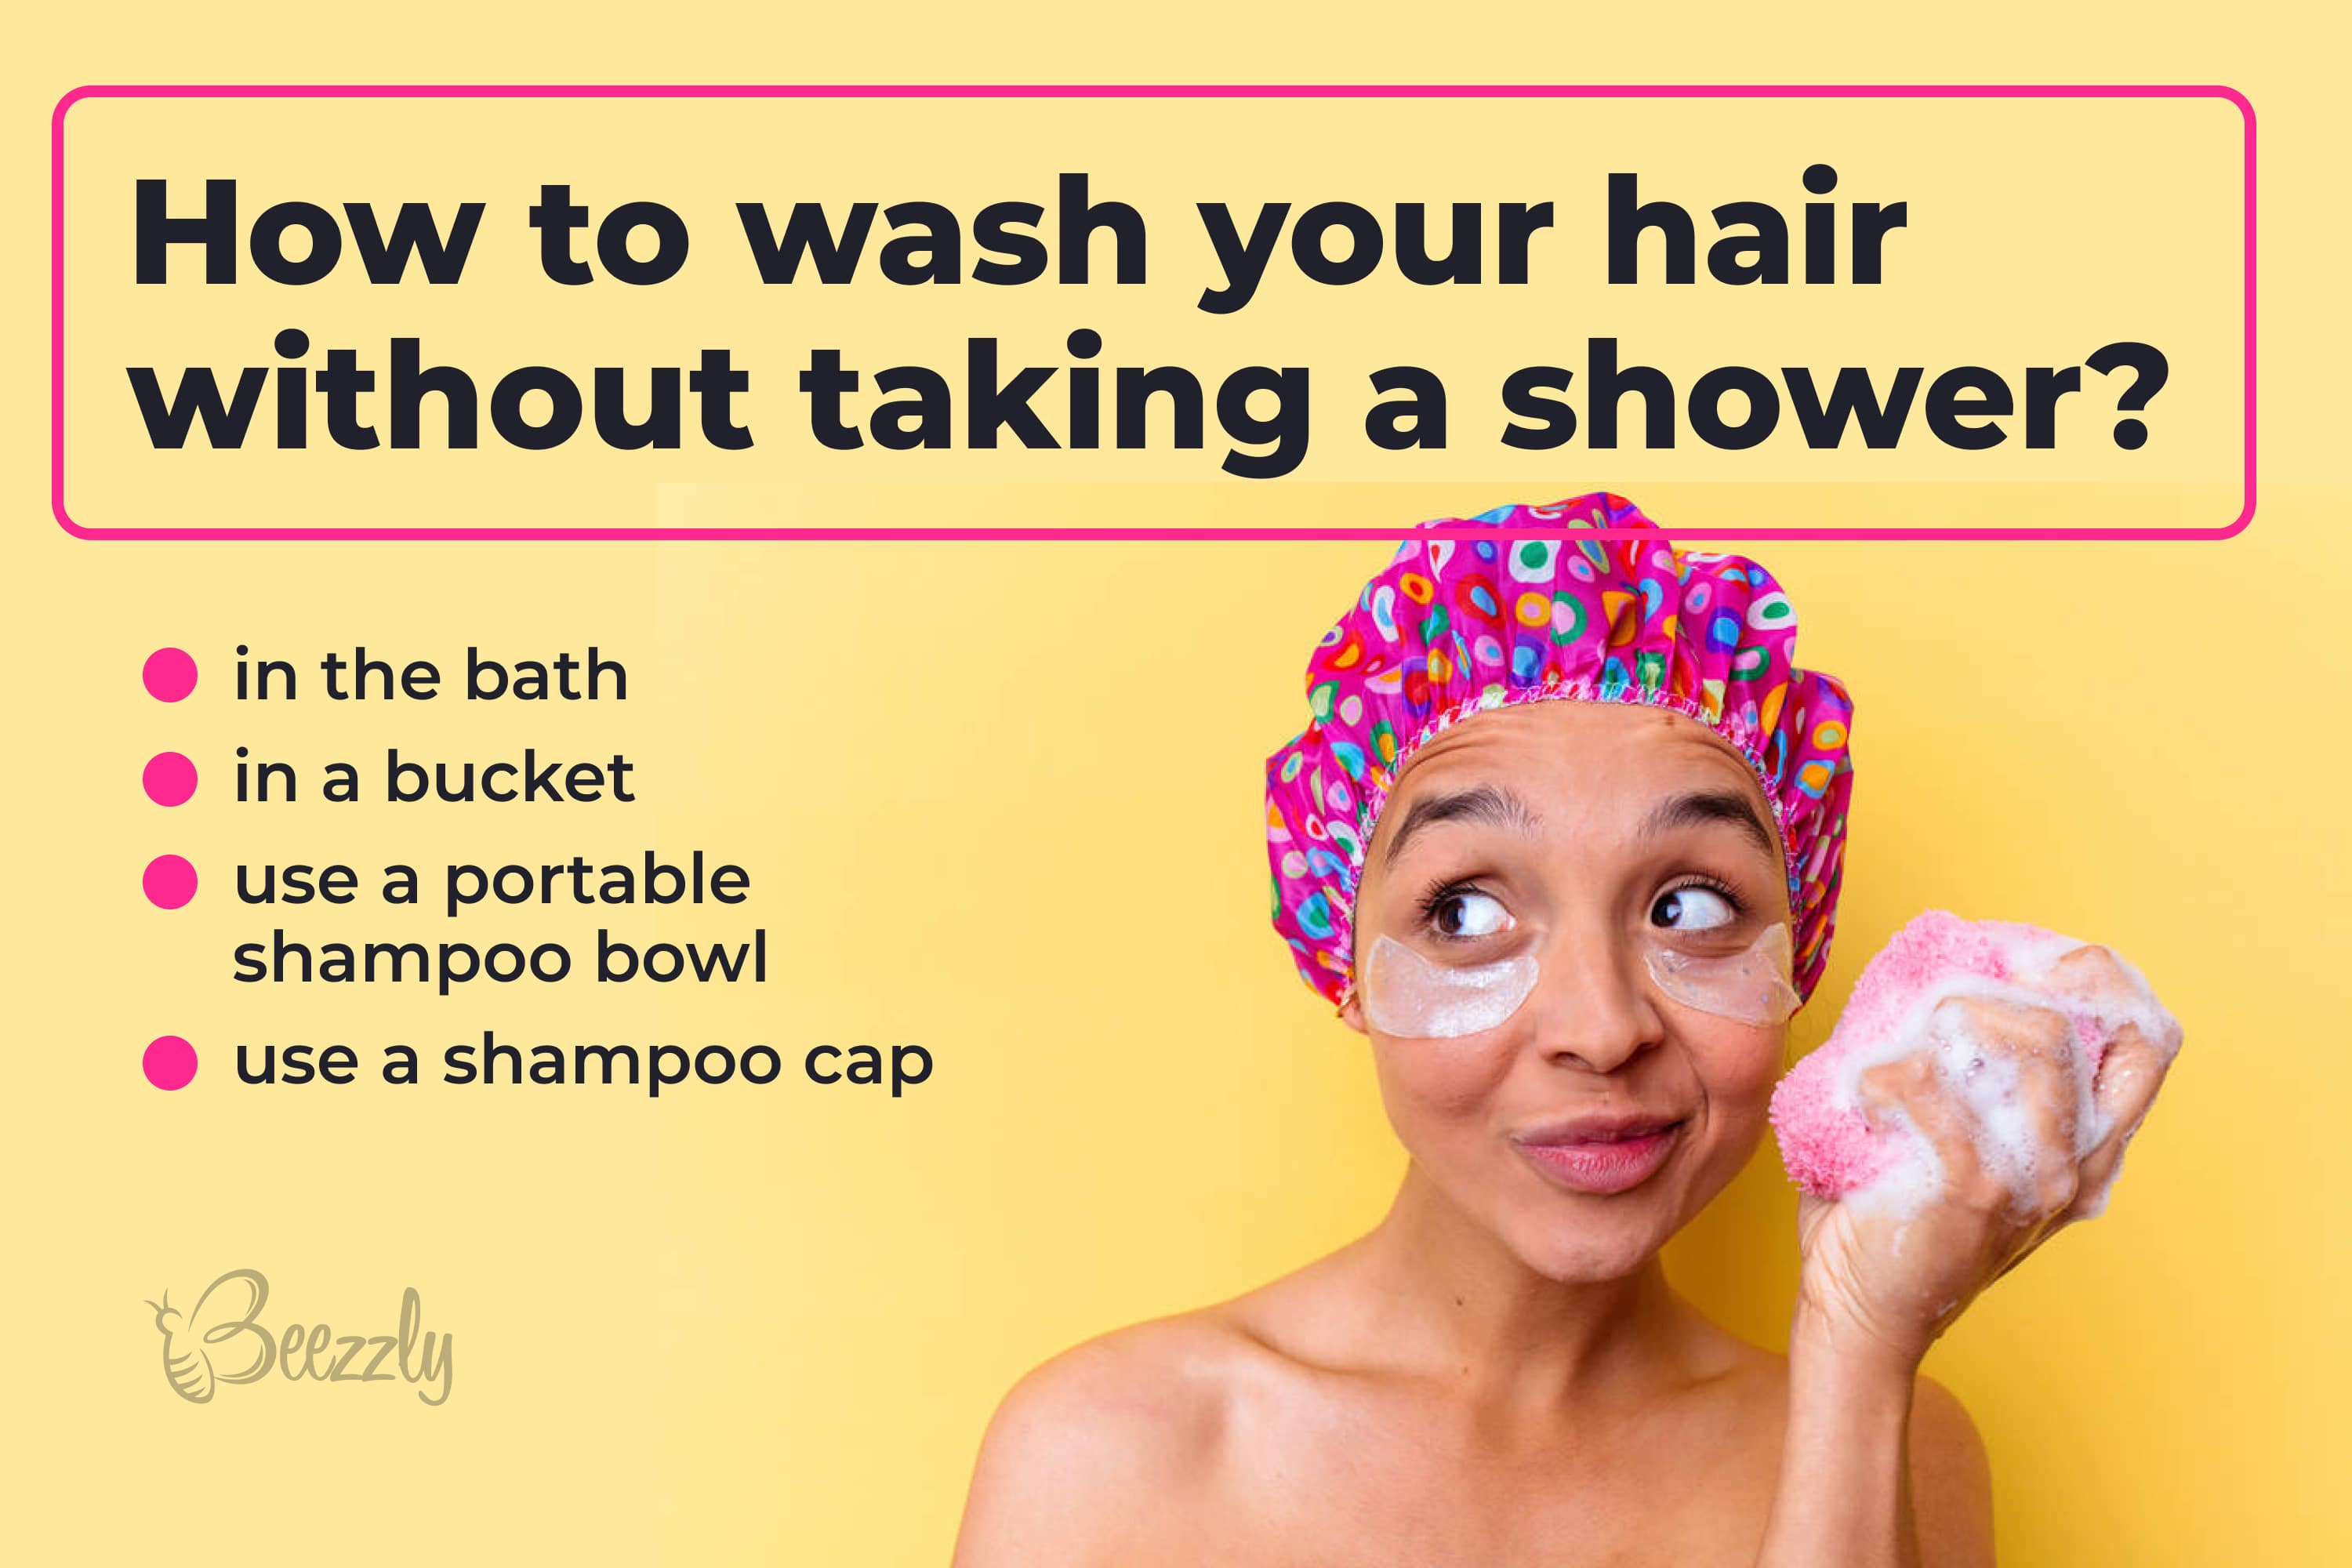 How to wash your hair without taking a shower